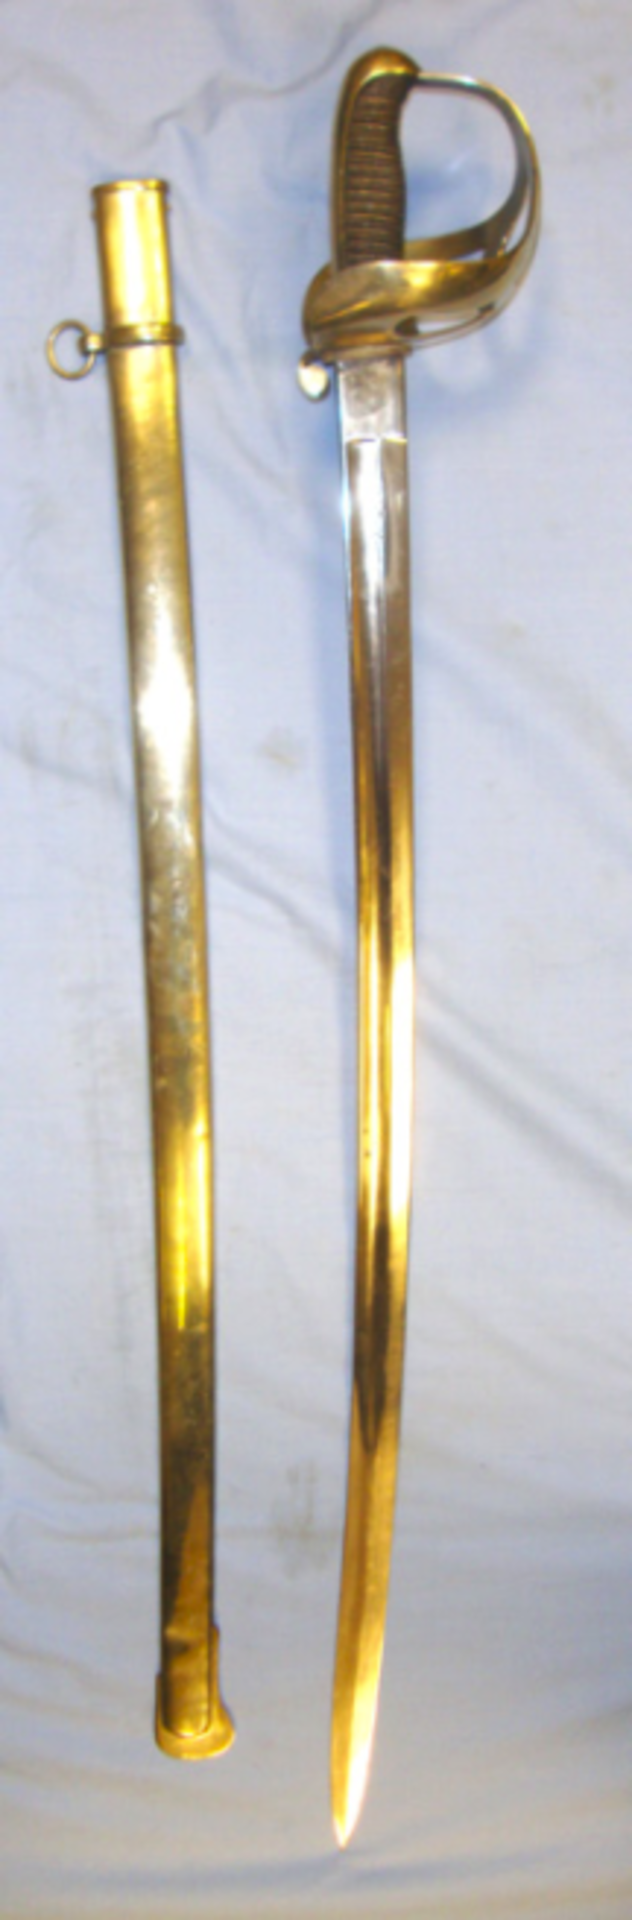 German Heavy Cavalry Sabre Etched 'Aug. Savelkoul Batavia' & Scabbard   This is a nice German - Image 3 of 3